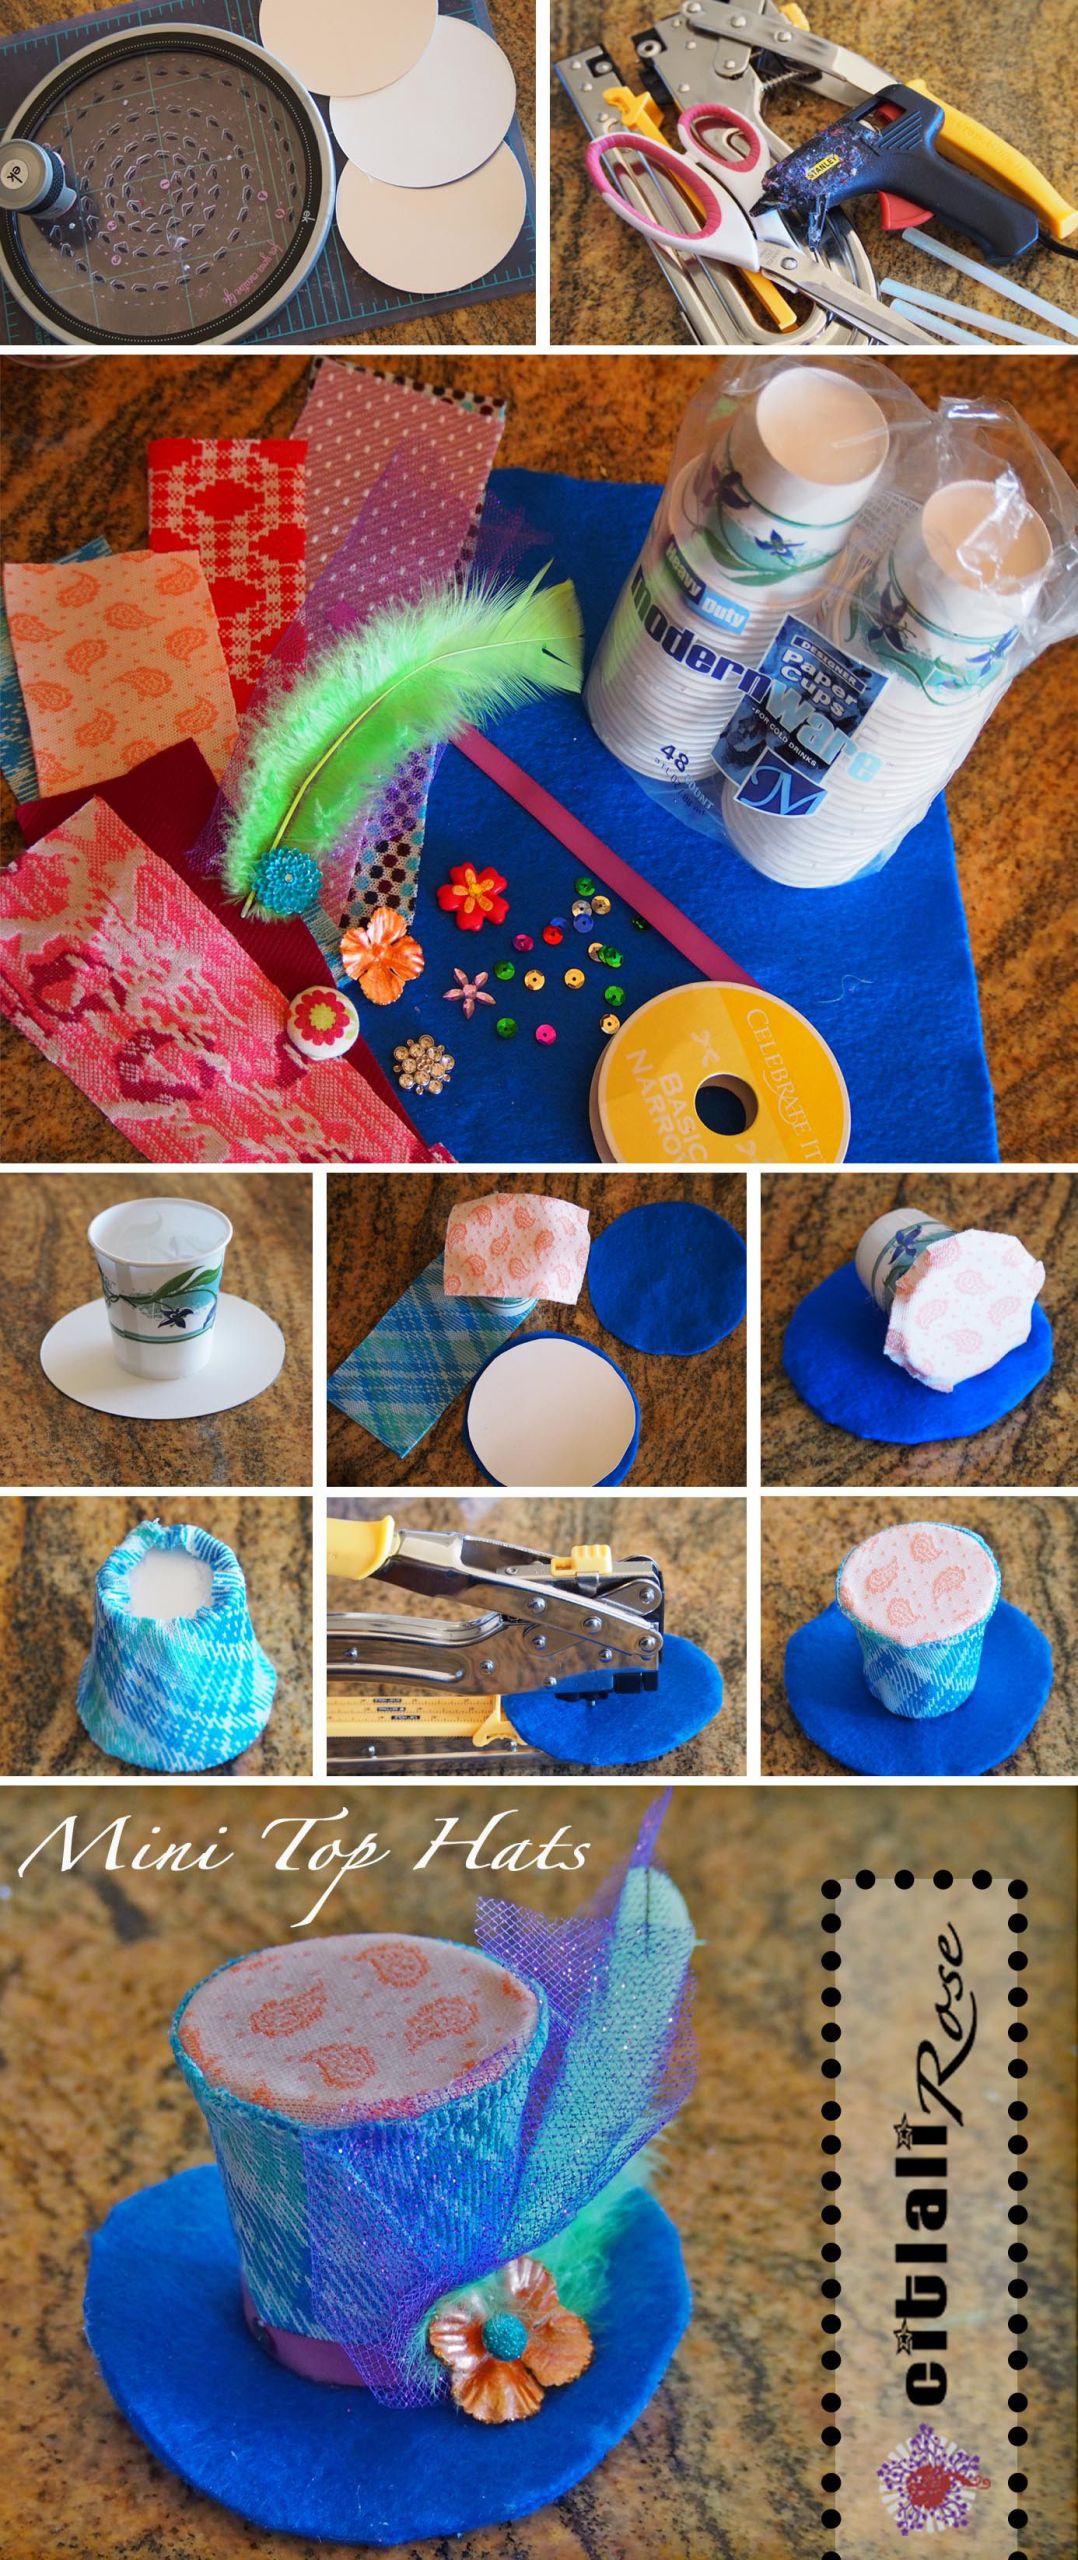 DIY Tea Party Hats For Adults
 CitlaliRoseMini Top Hat Collage